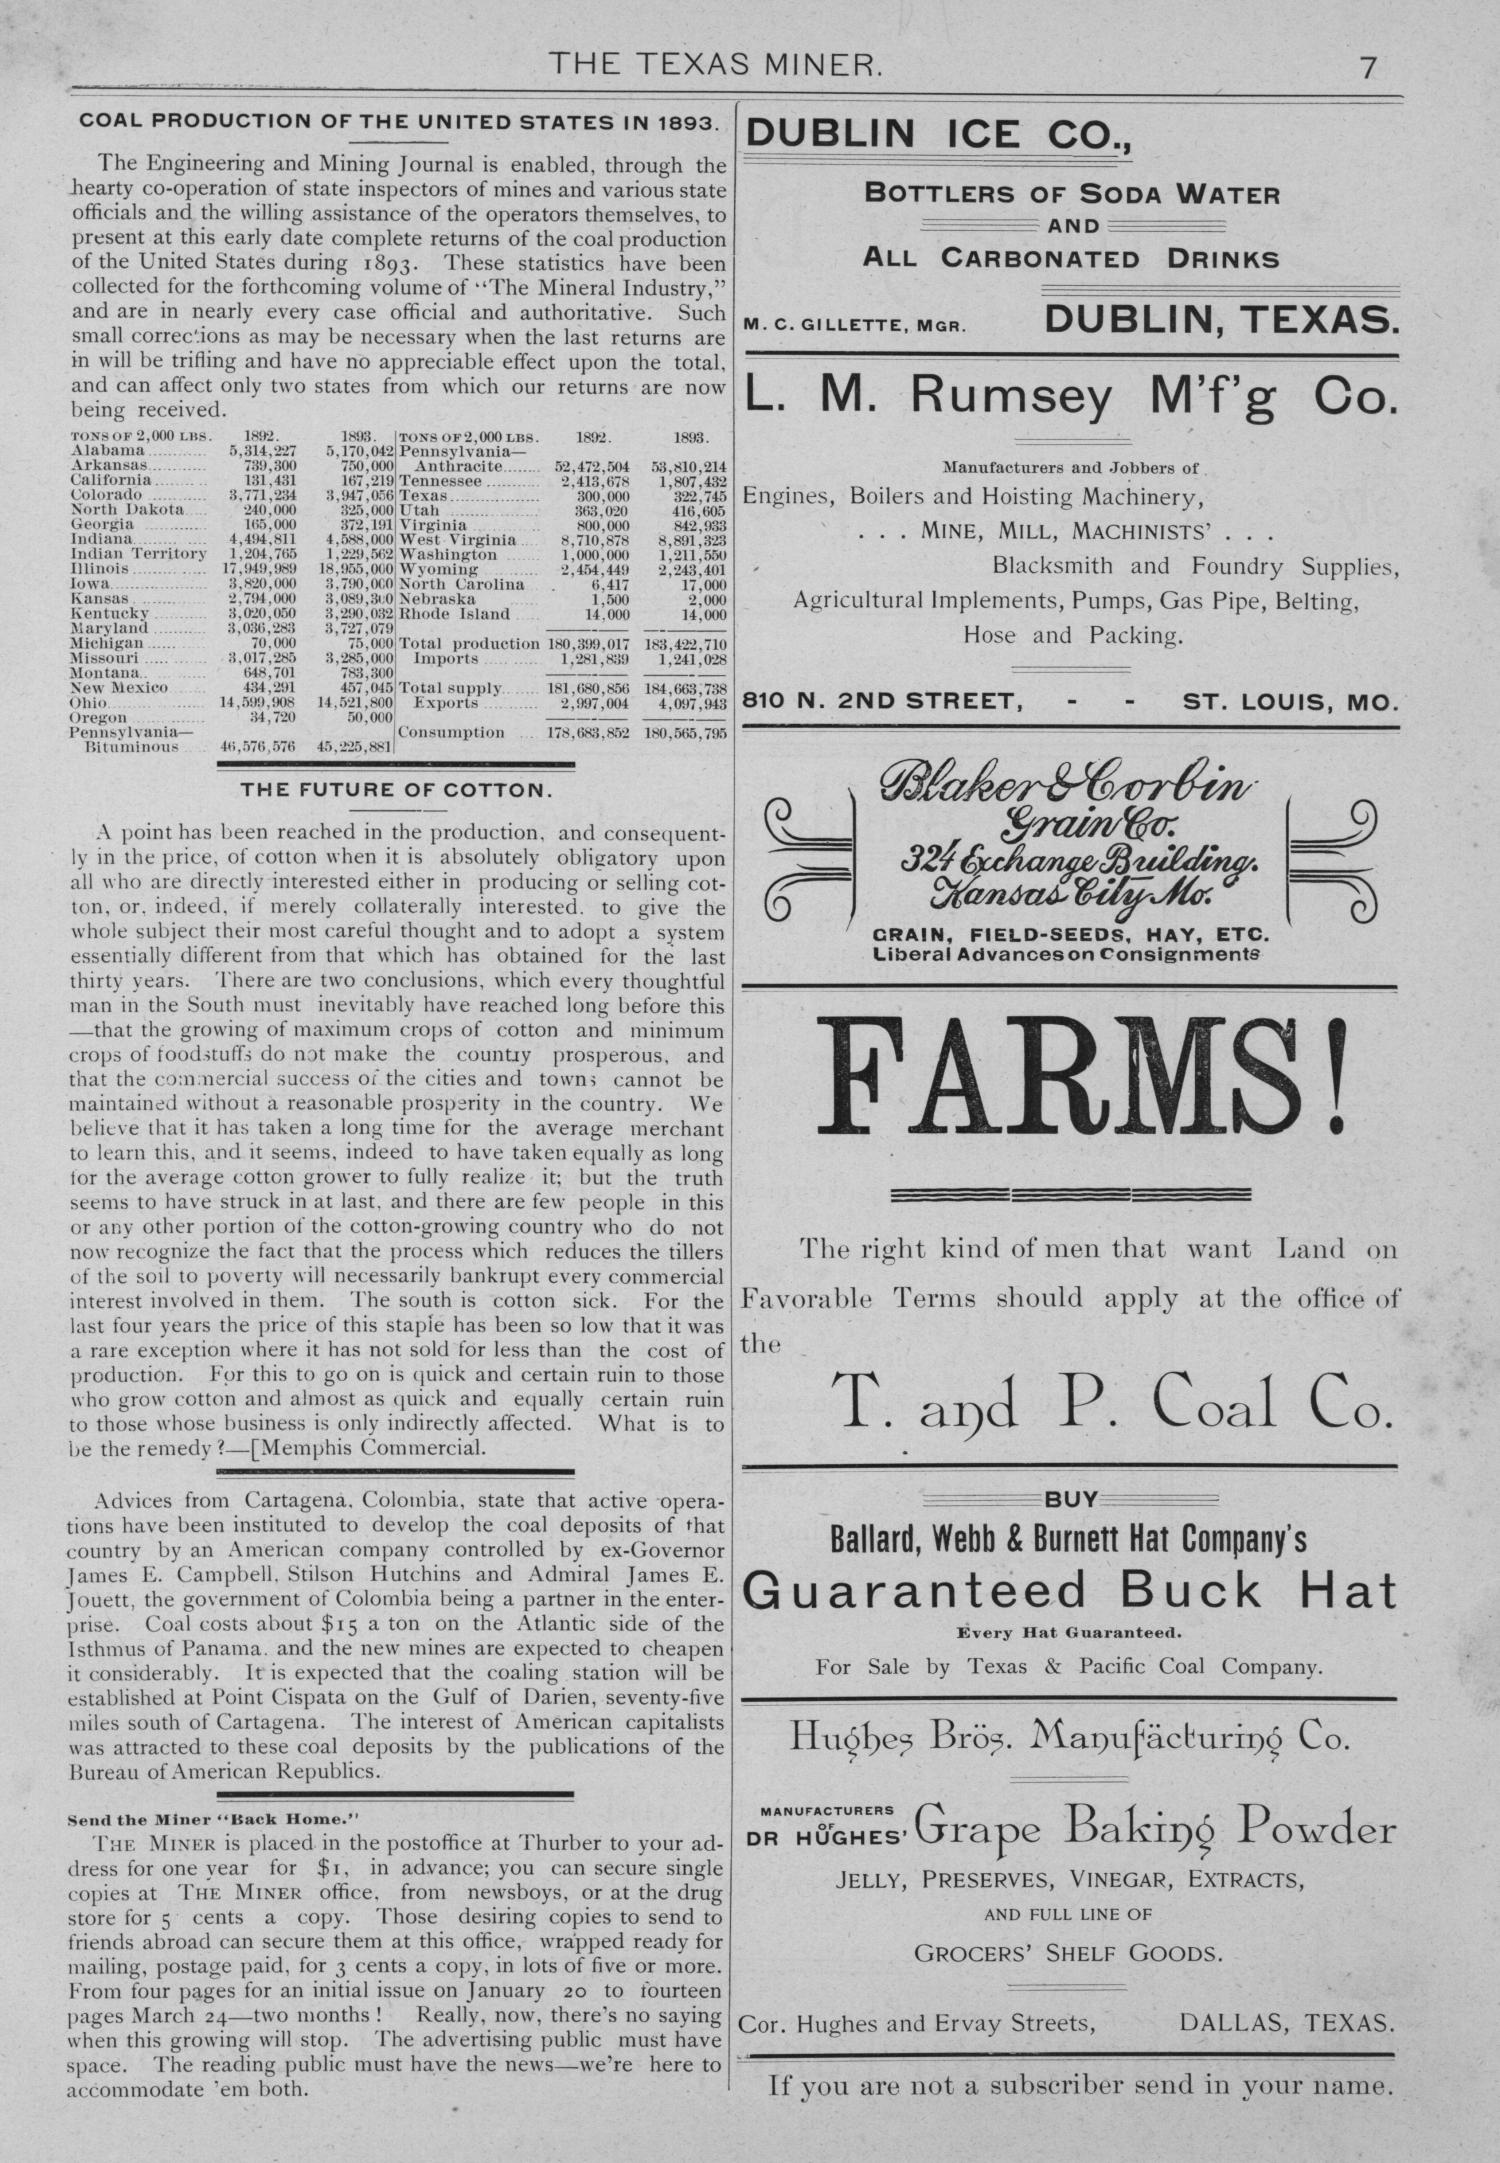 The Texas Miner, Volume 1, Number 10, March 24, 1894
                                                
                                                    7
                                                